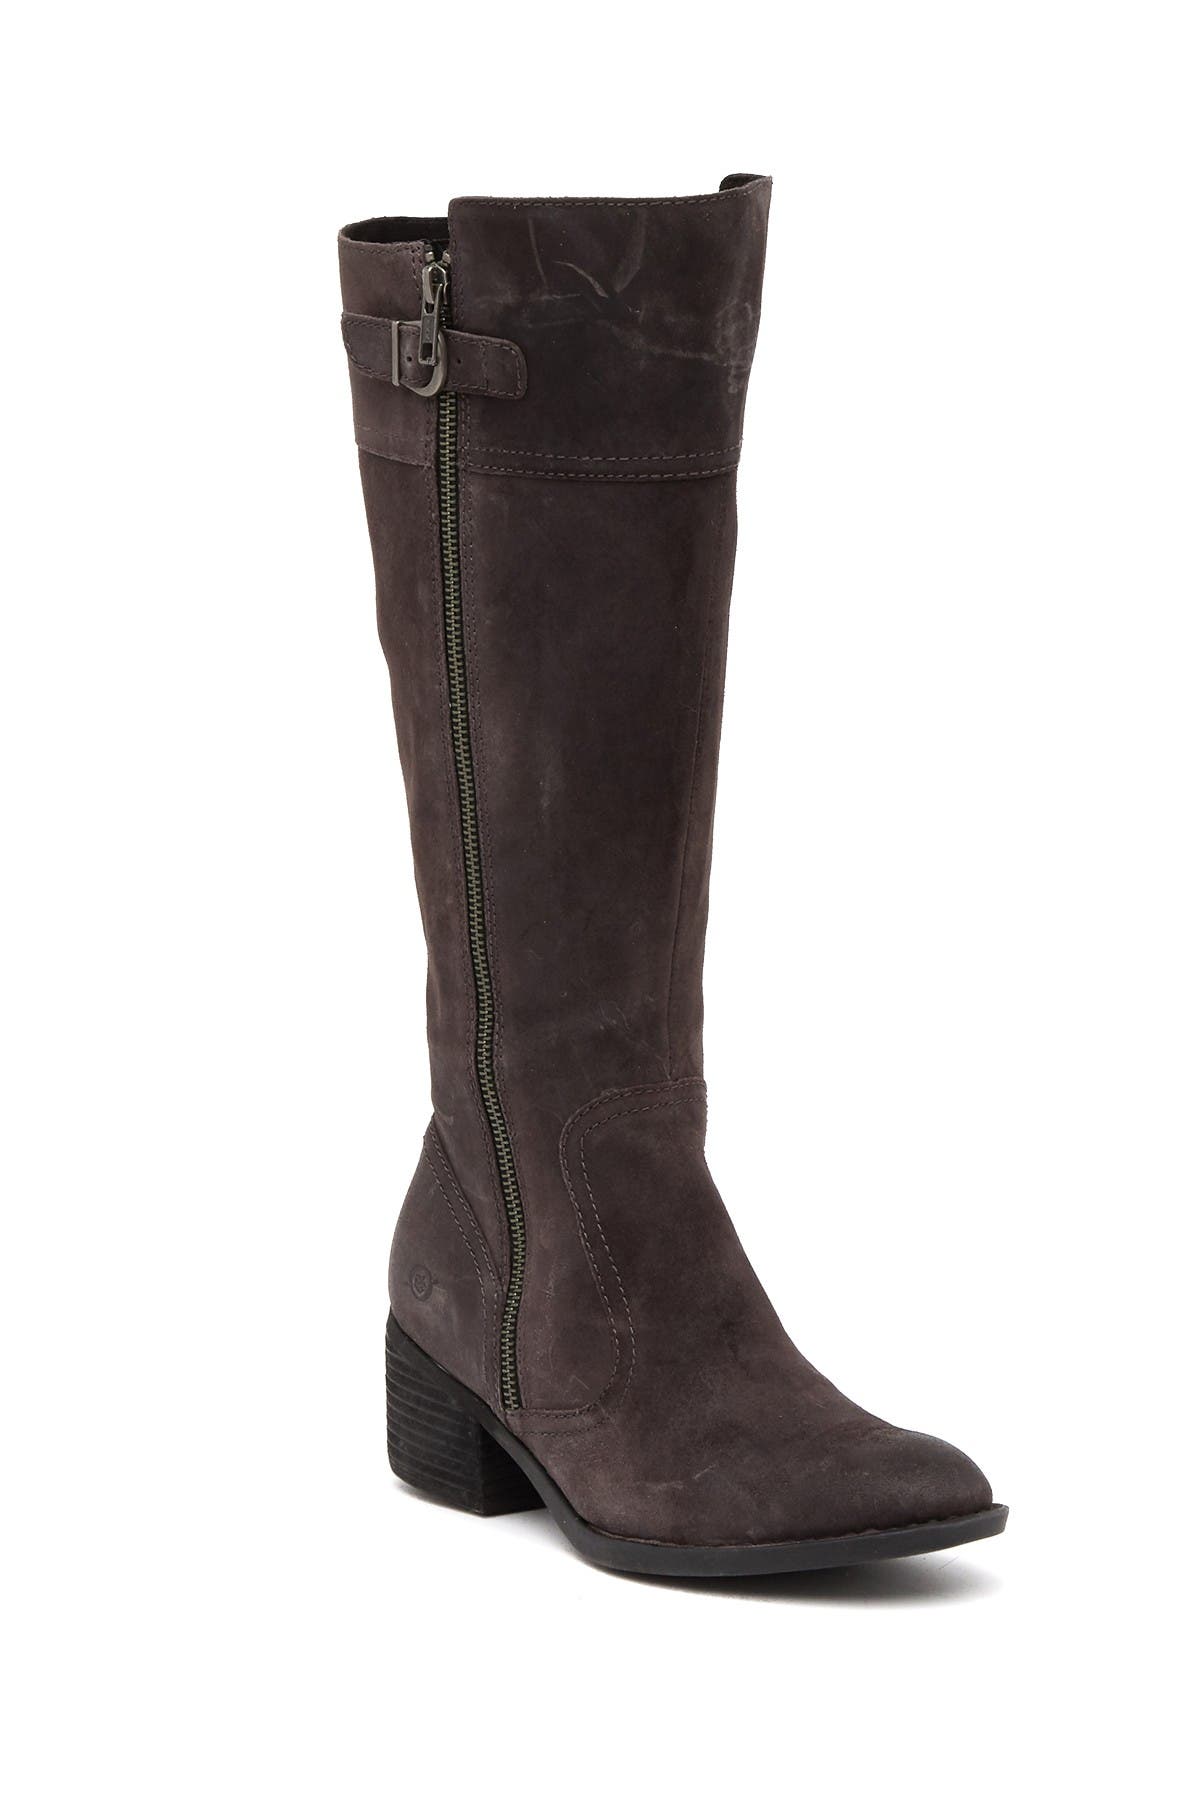 suede riding boots wide calf